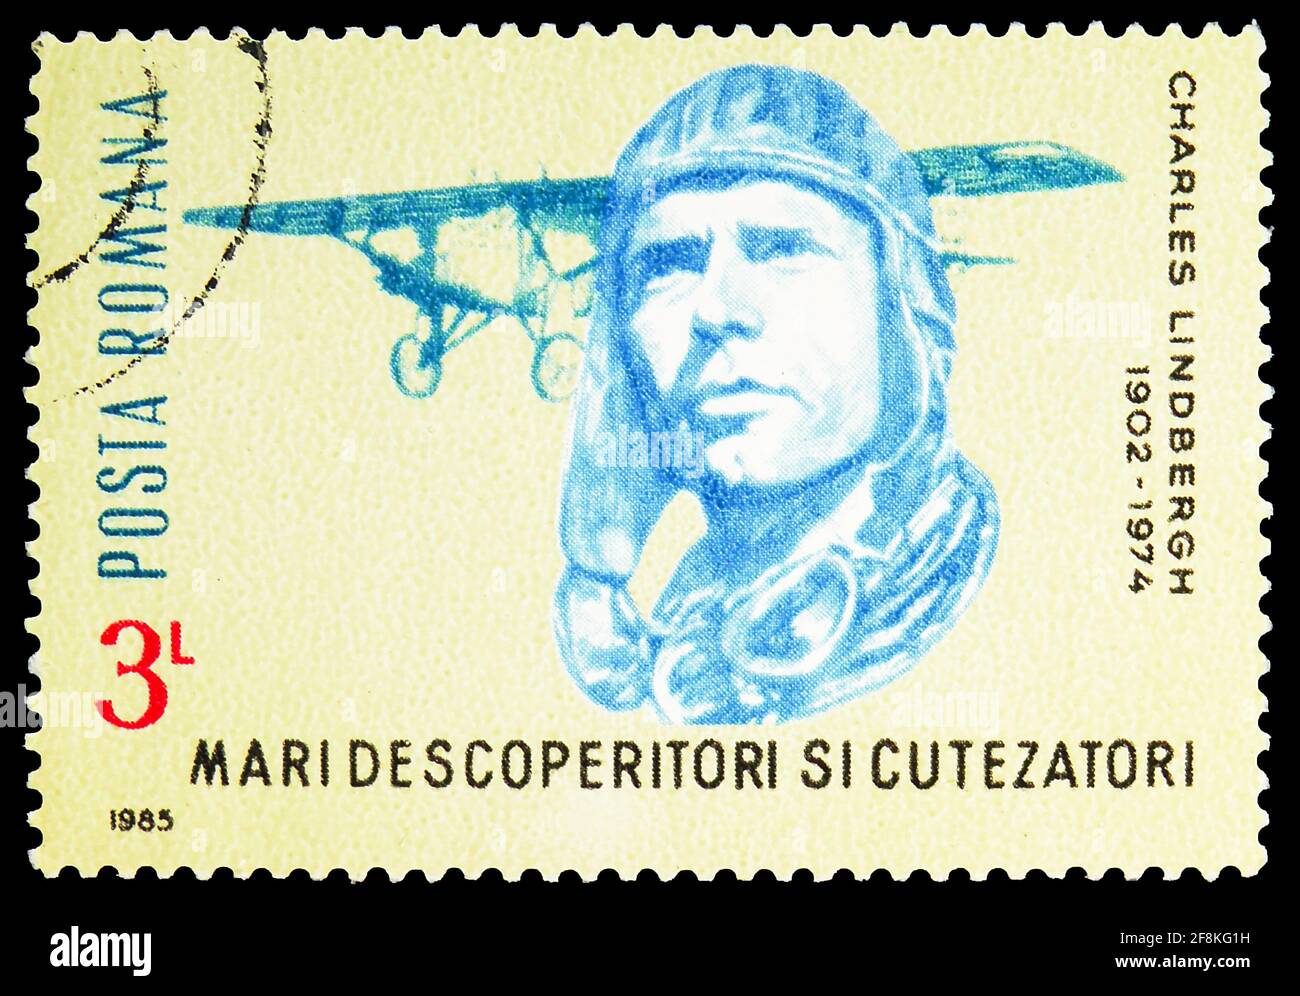 MOSCOW, RUSSIA - NOVEMBER 10, 2019: Postage stamp printed in Romania shows Charles Lindbergh, Famous Researchers and Explorers serie, circa 1985 Stock Photo